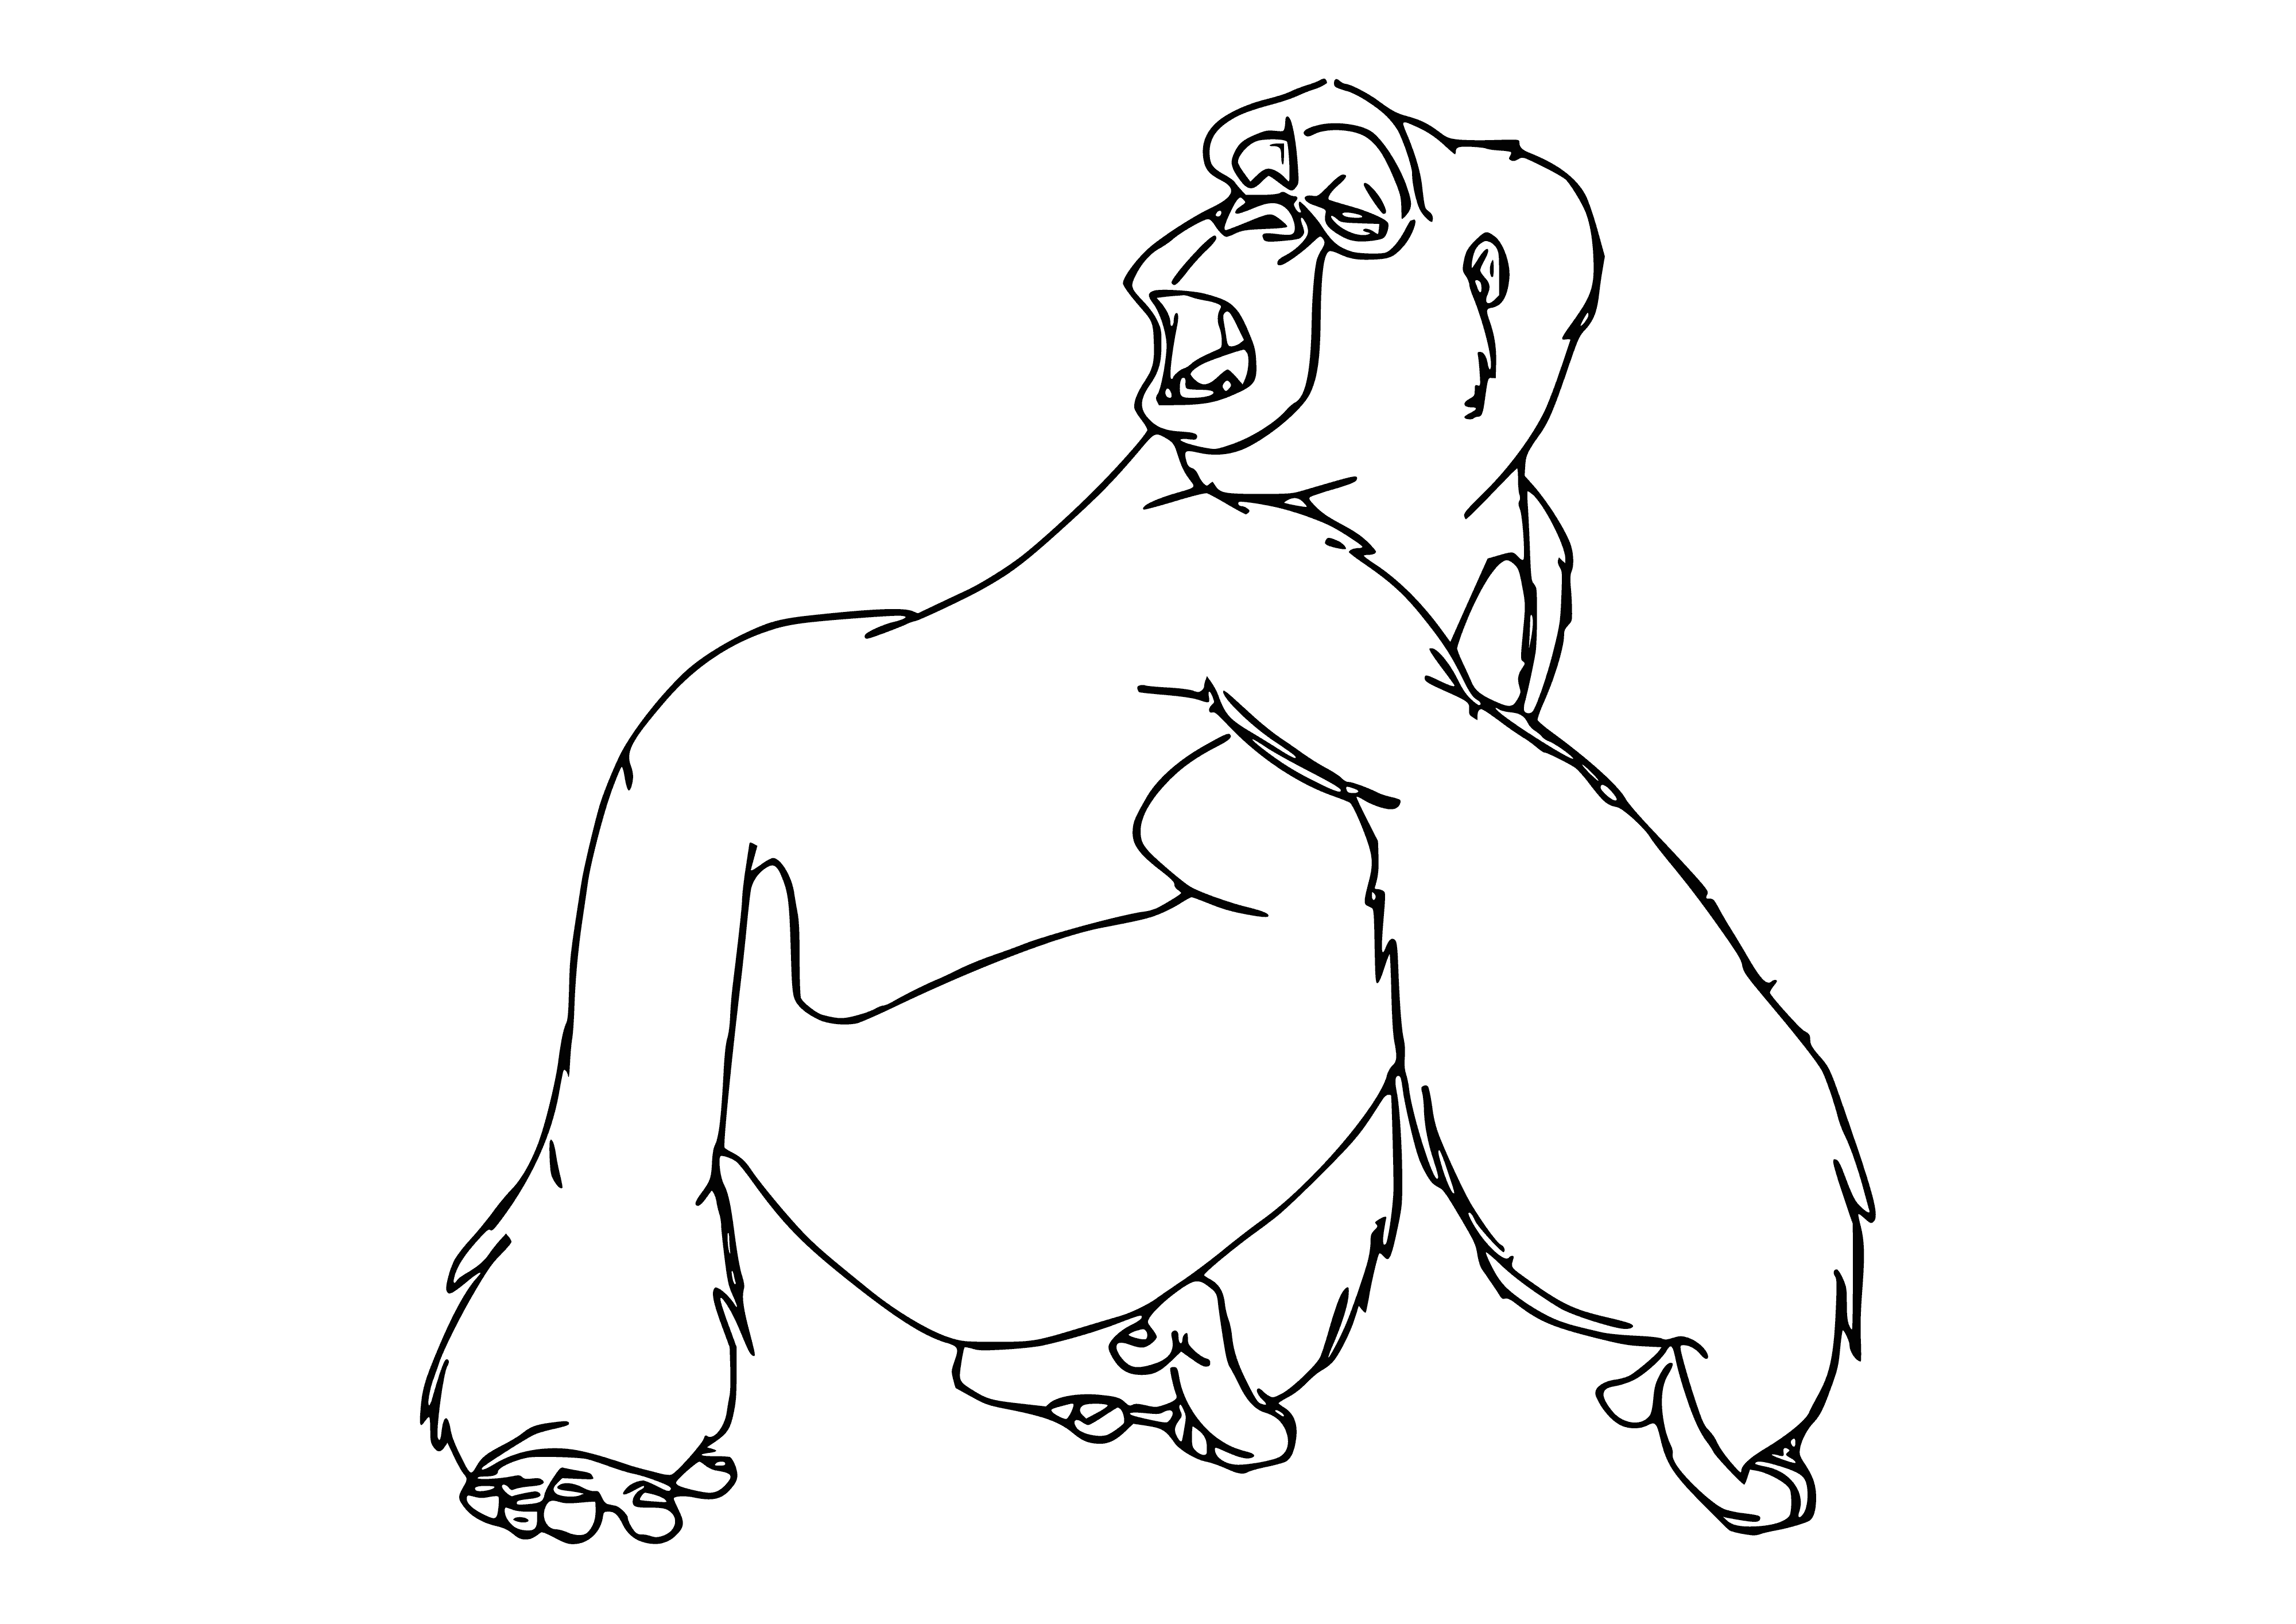 coloring page: Kala is the center of attention in a group of gorillas, with light brown fur and dark eyes. She is admired by the other gorillas.